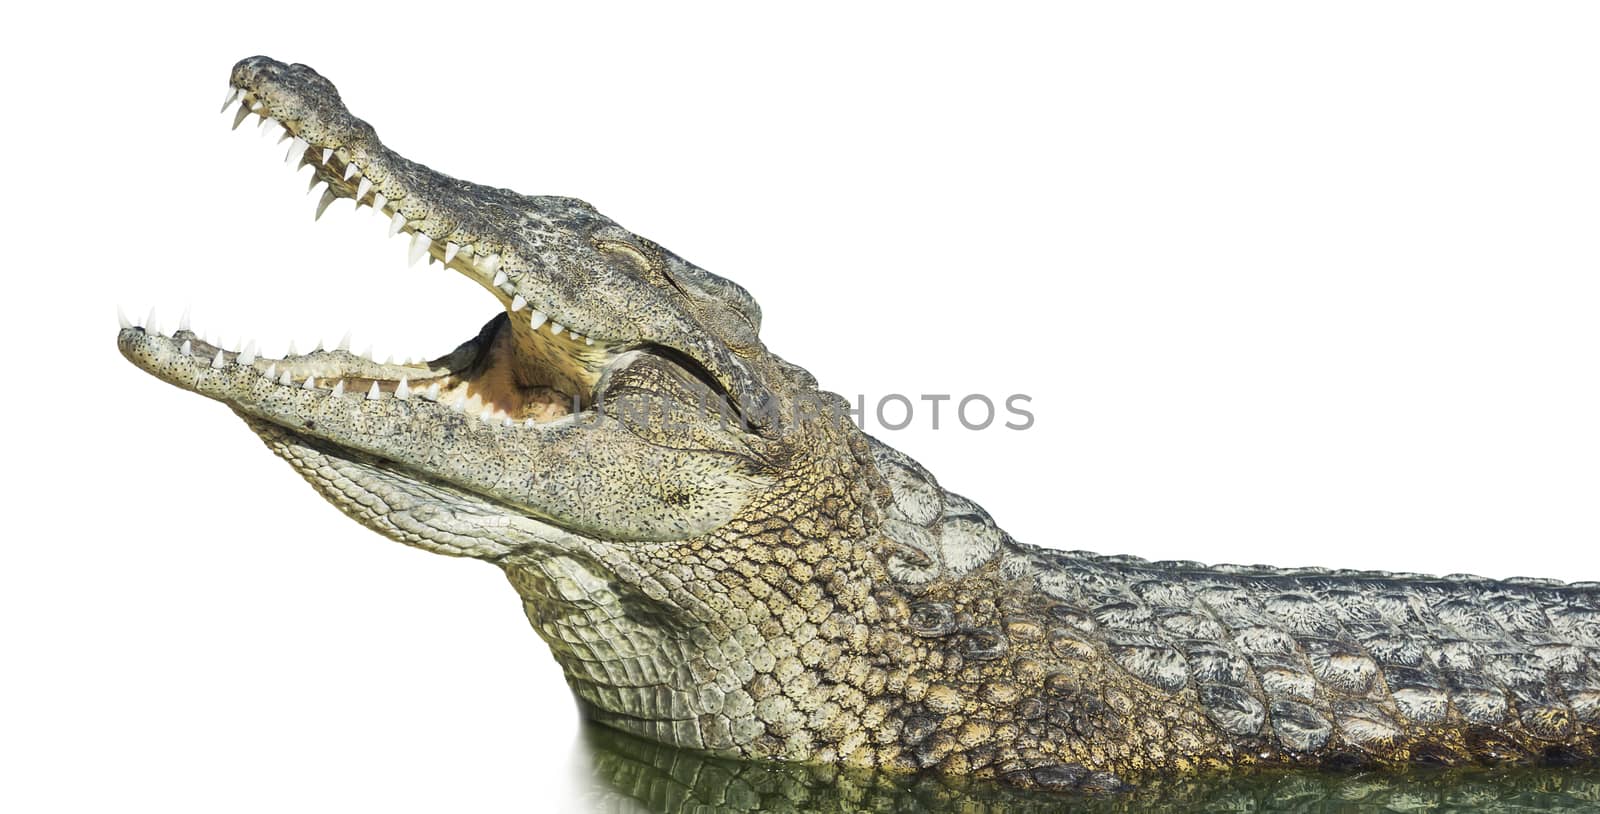 large American crocodile with open mouth  by MegaArt